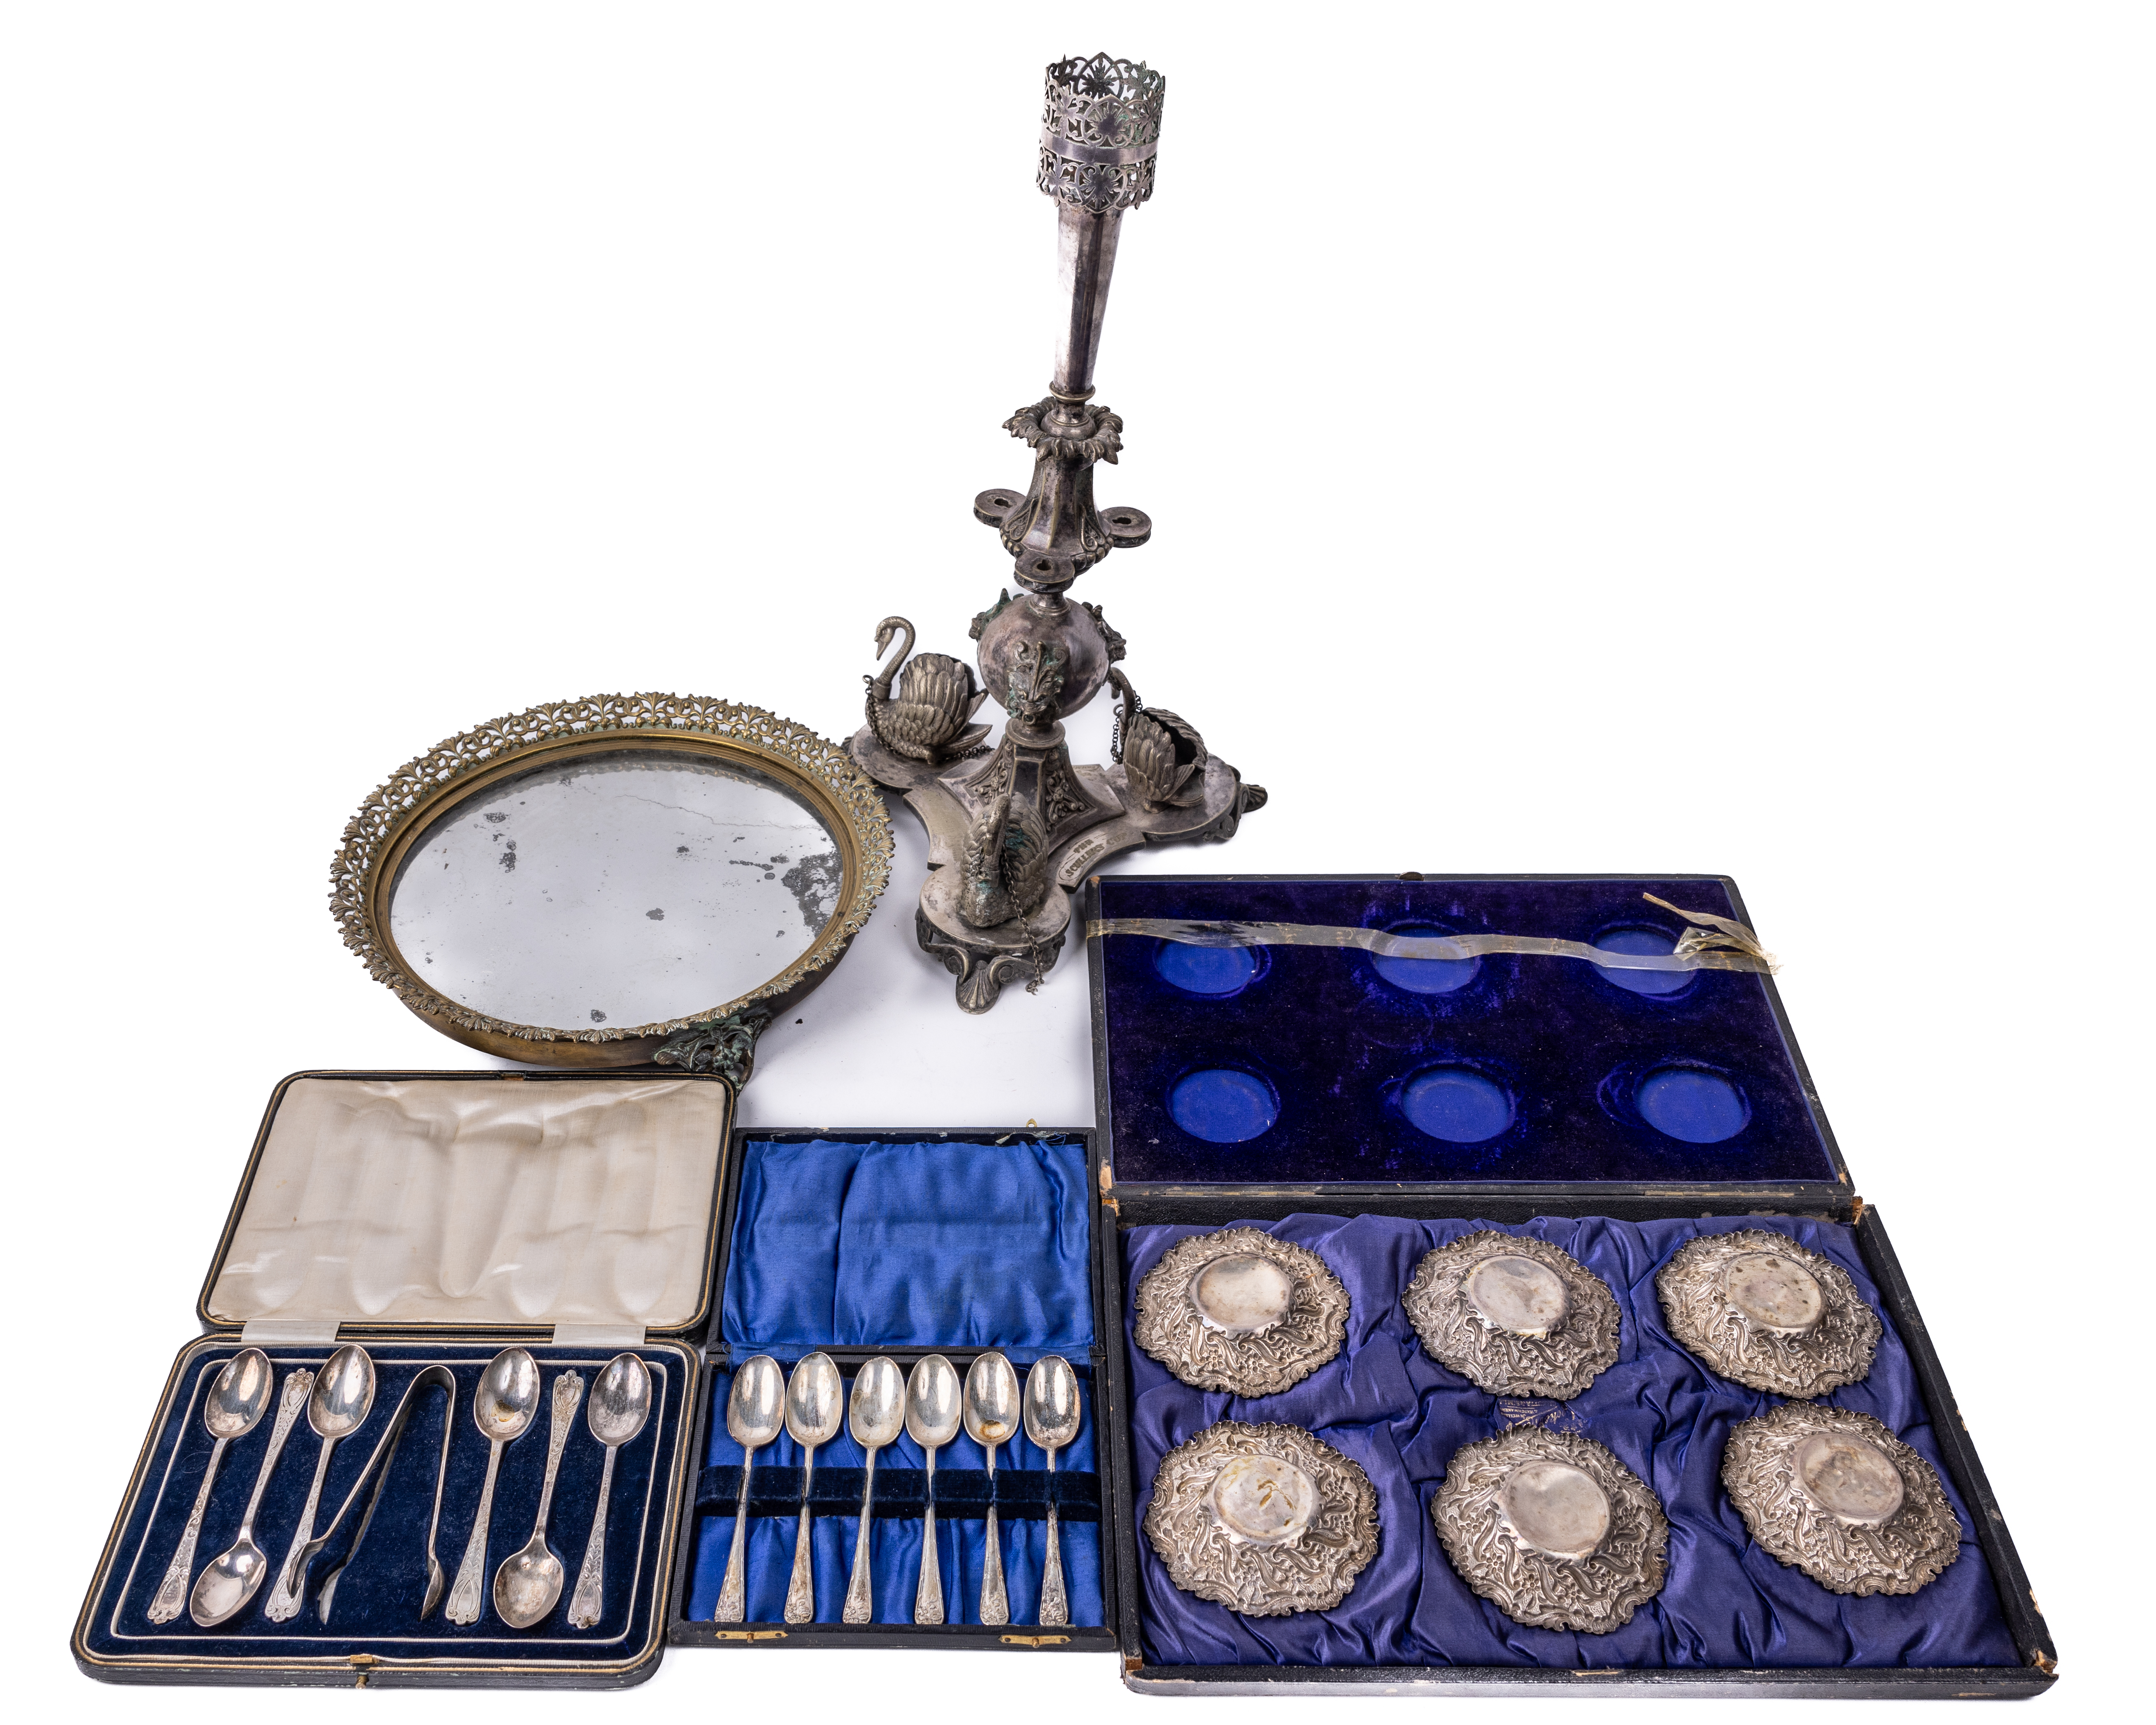 A Victorian silver plated Centerpiece, with grotesque mask mounts and perched swans on a triform